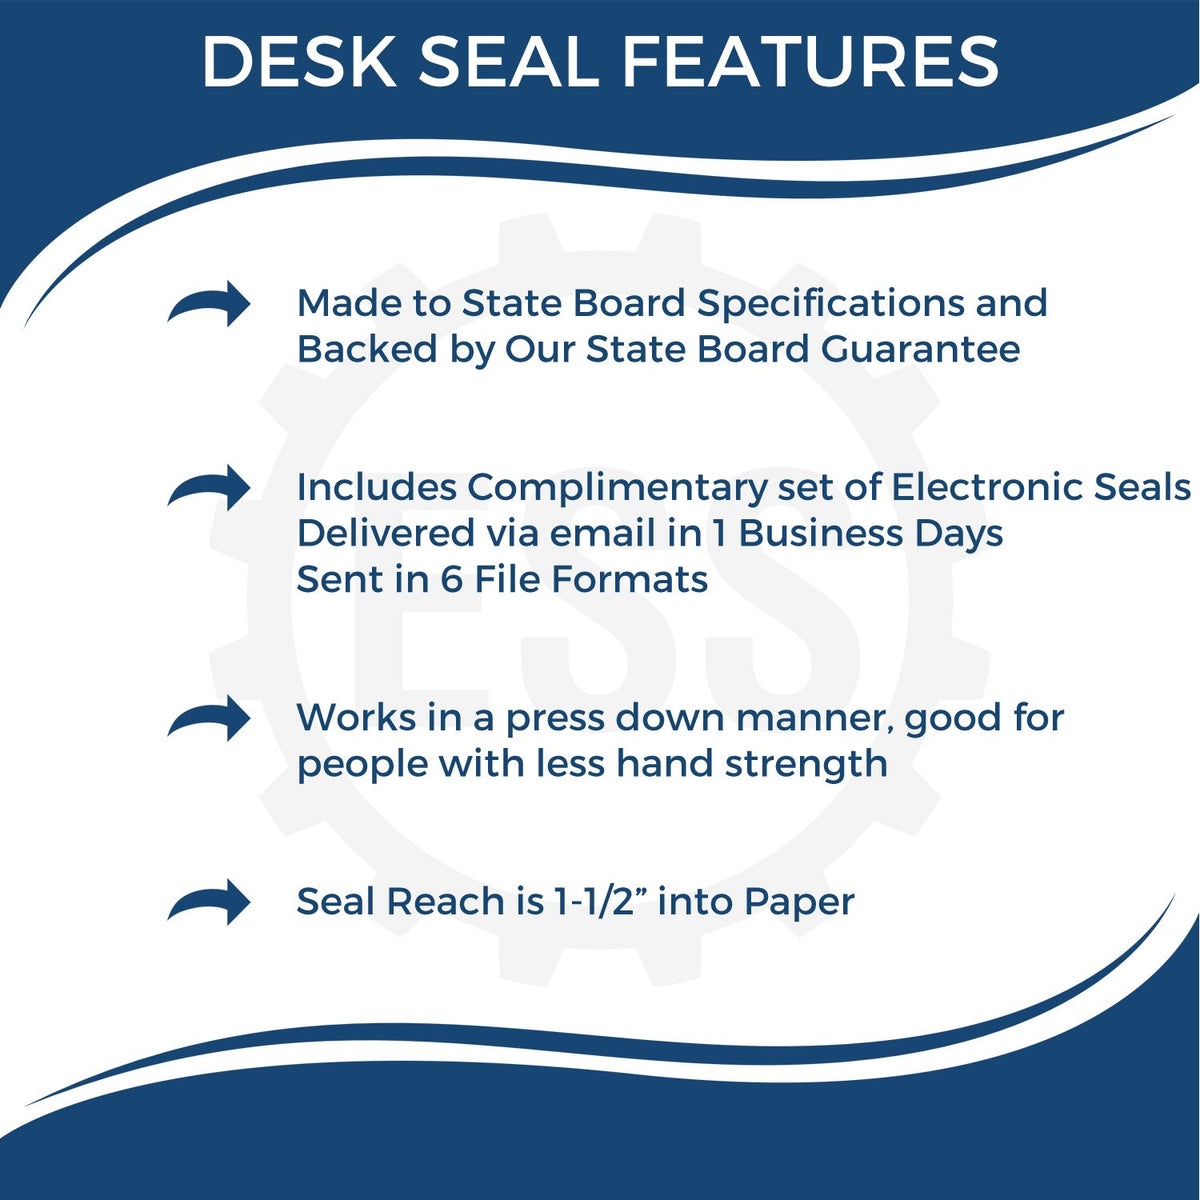 A picture of an infographic highlighting the selling points for the West Virginia Engineer Desk Seal